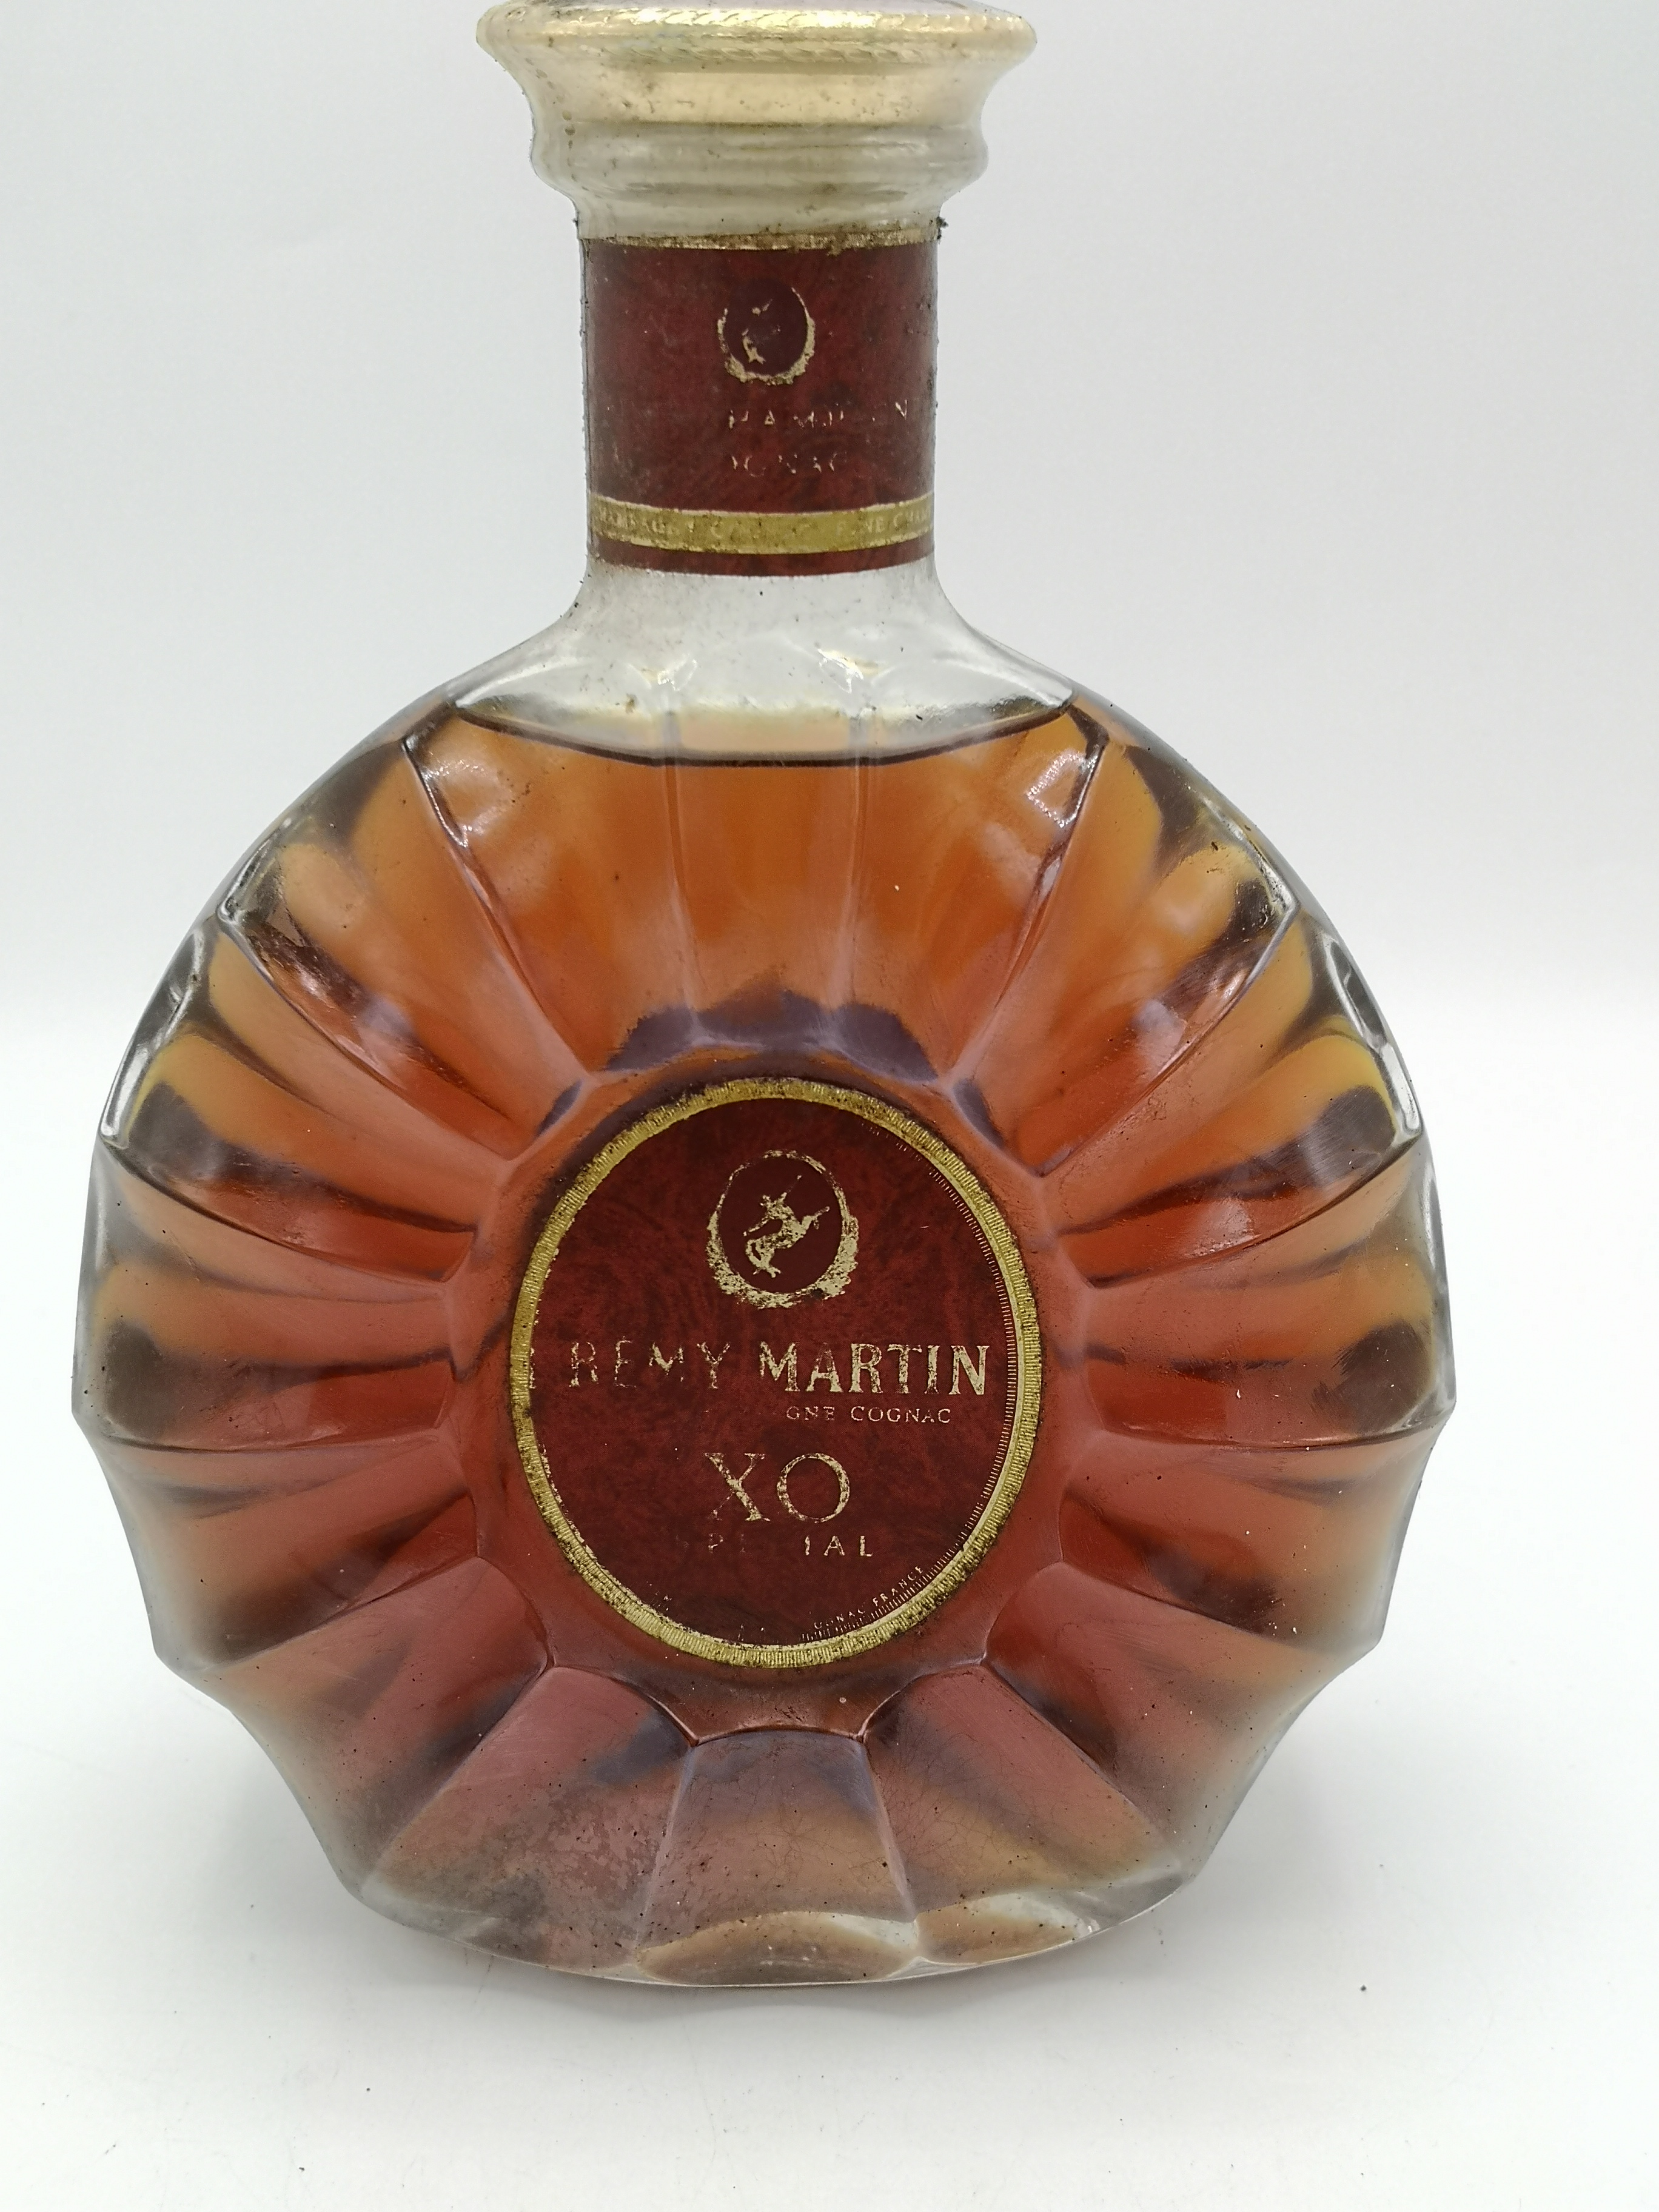 70cl bottle of Remy Martin XO special cognac - Image 2 of 10